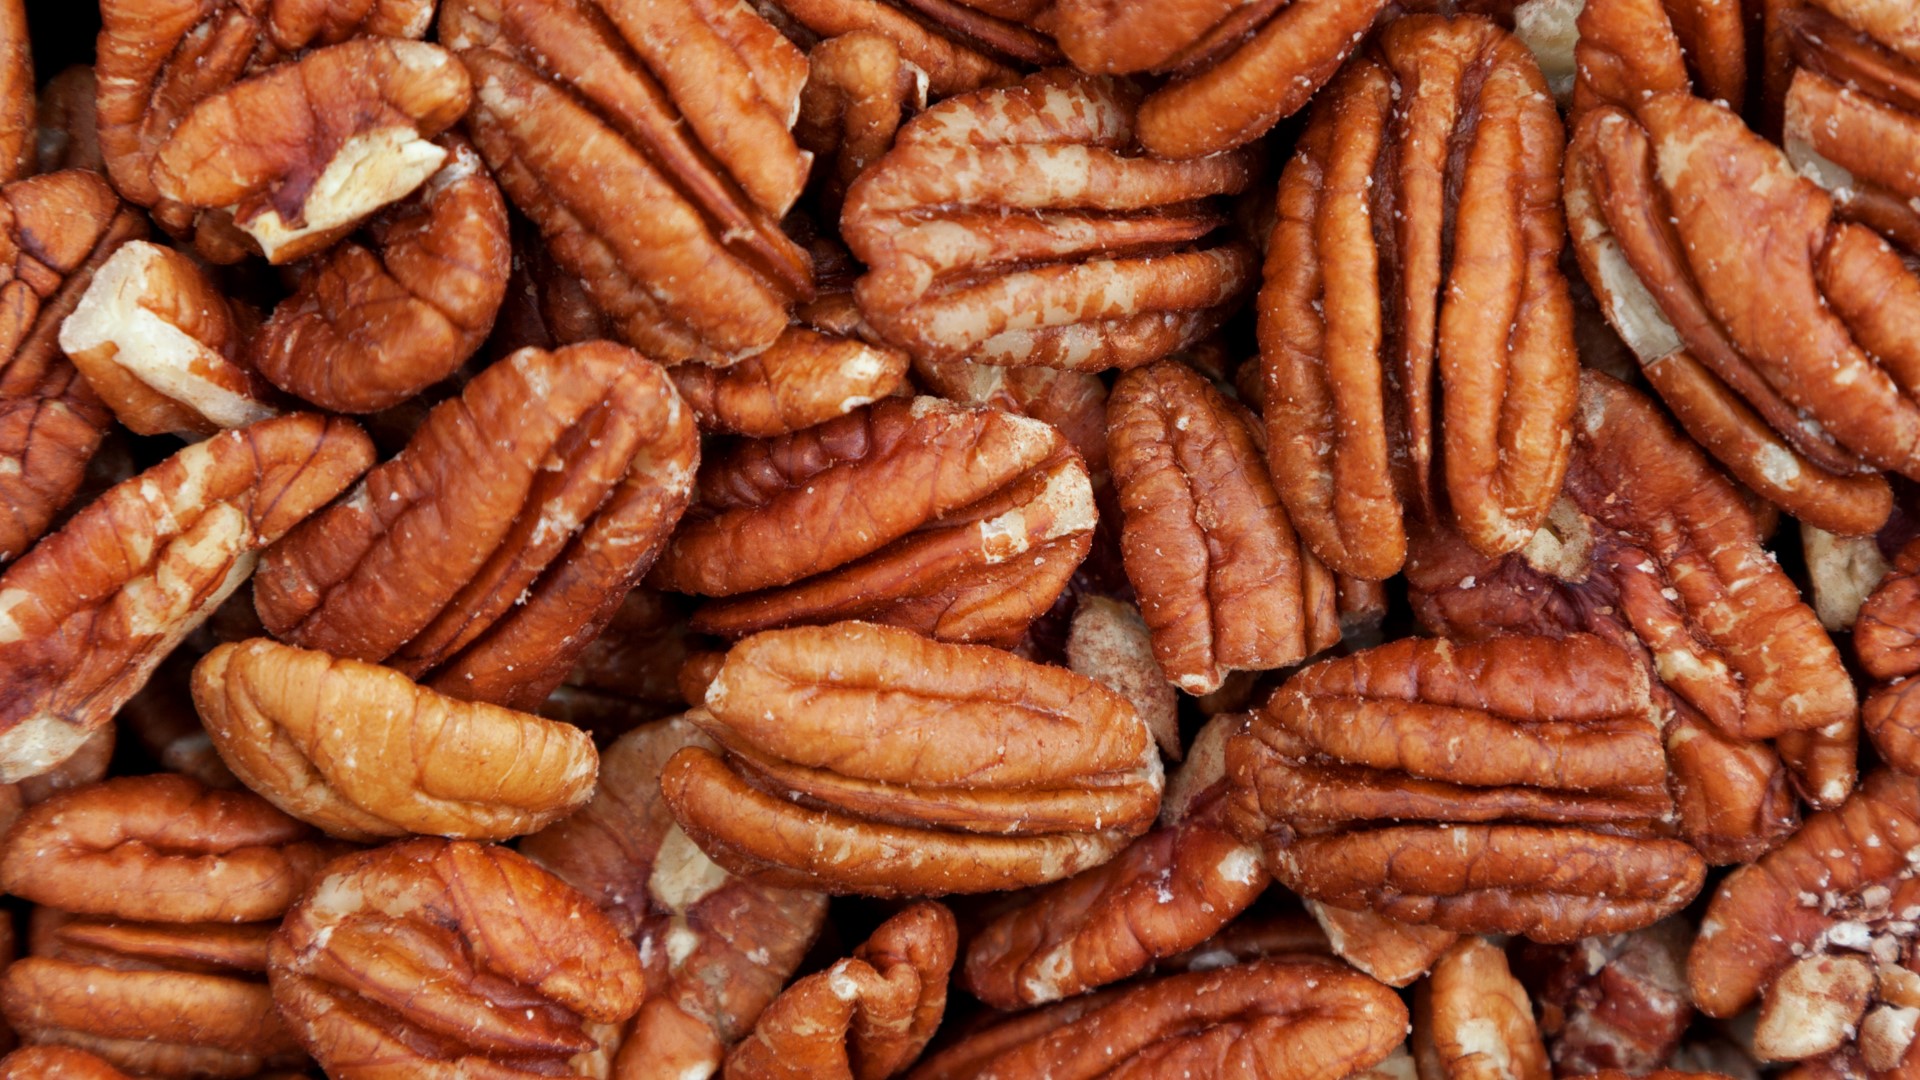 9NEWS Nutritionist Regina Topelson shares easy ways to add nutrient-rich nuts to your diet.